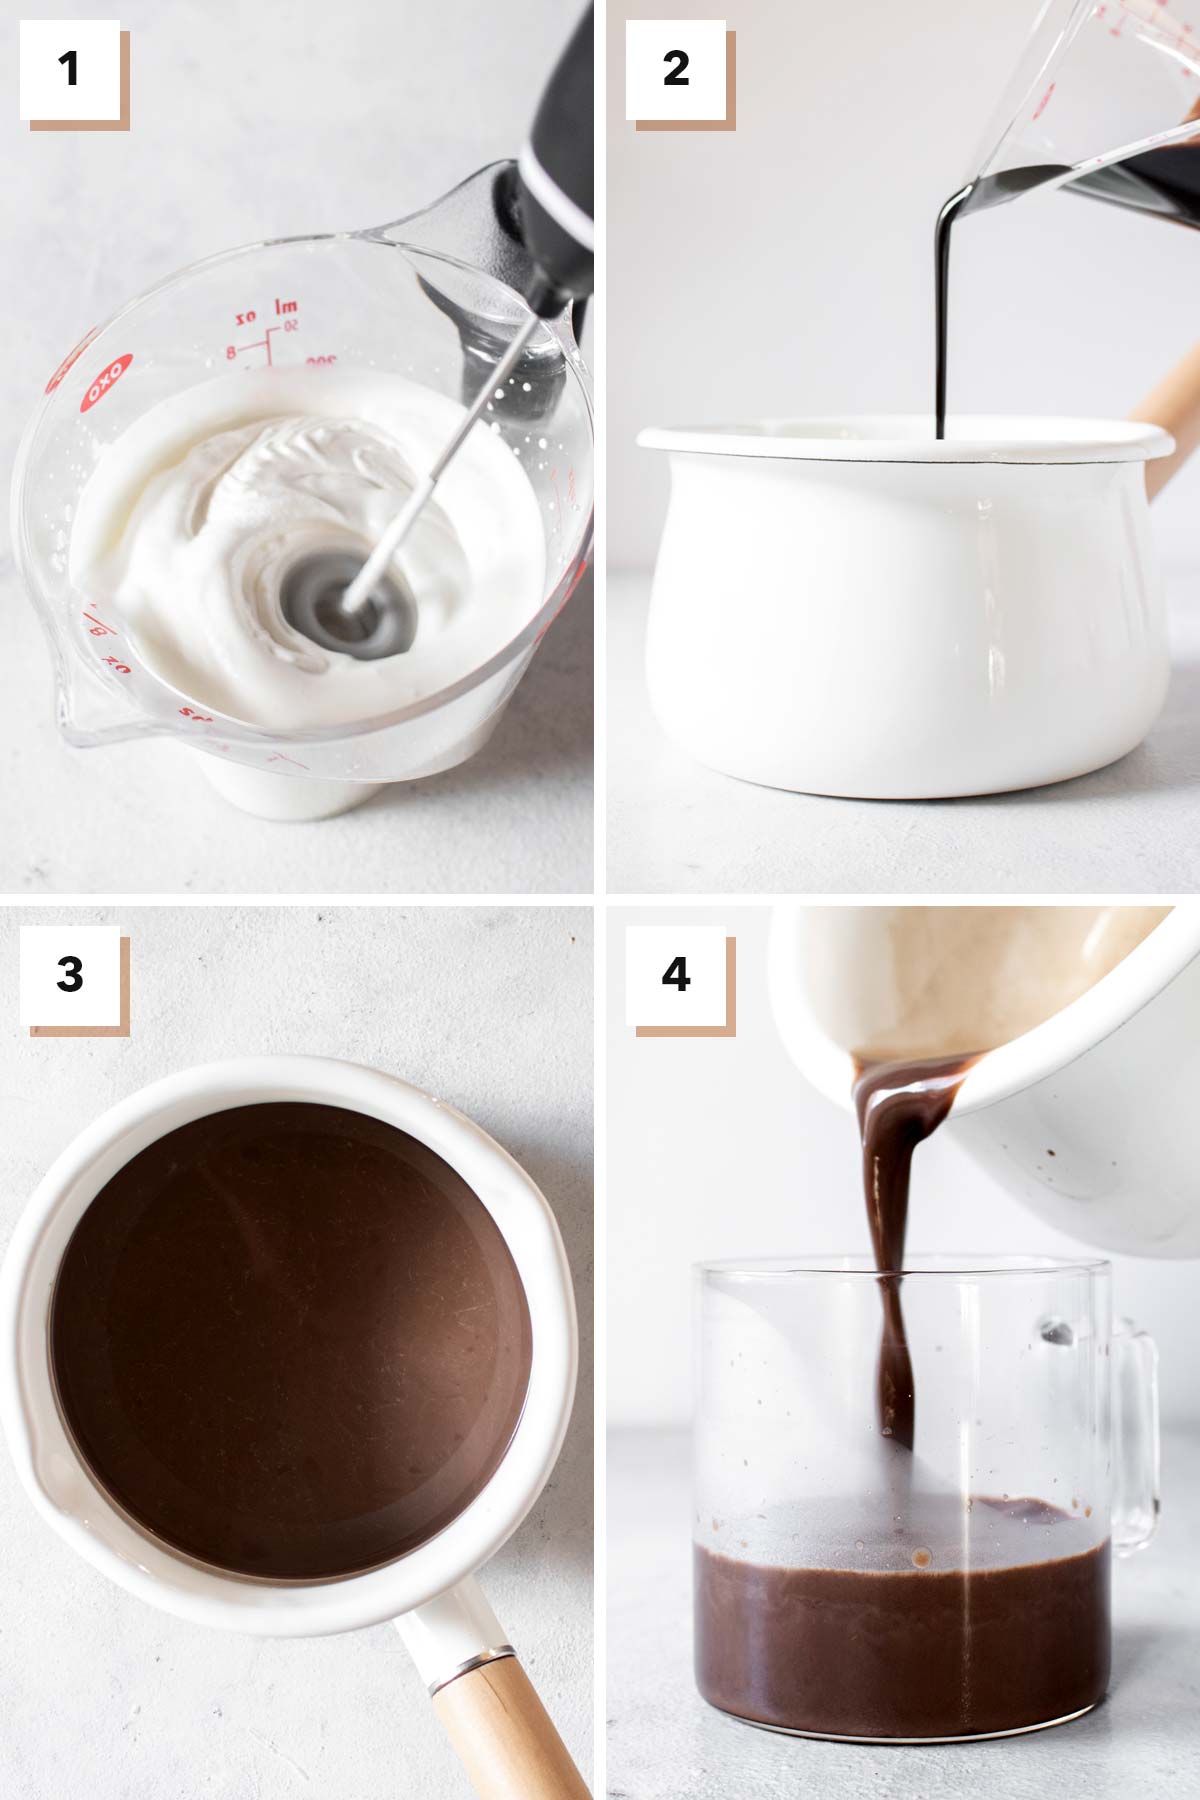 Four photos showing the steps to make peppermint hot chocolate.